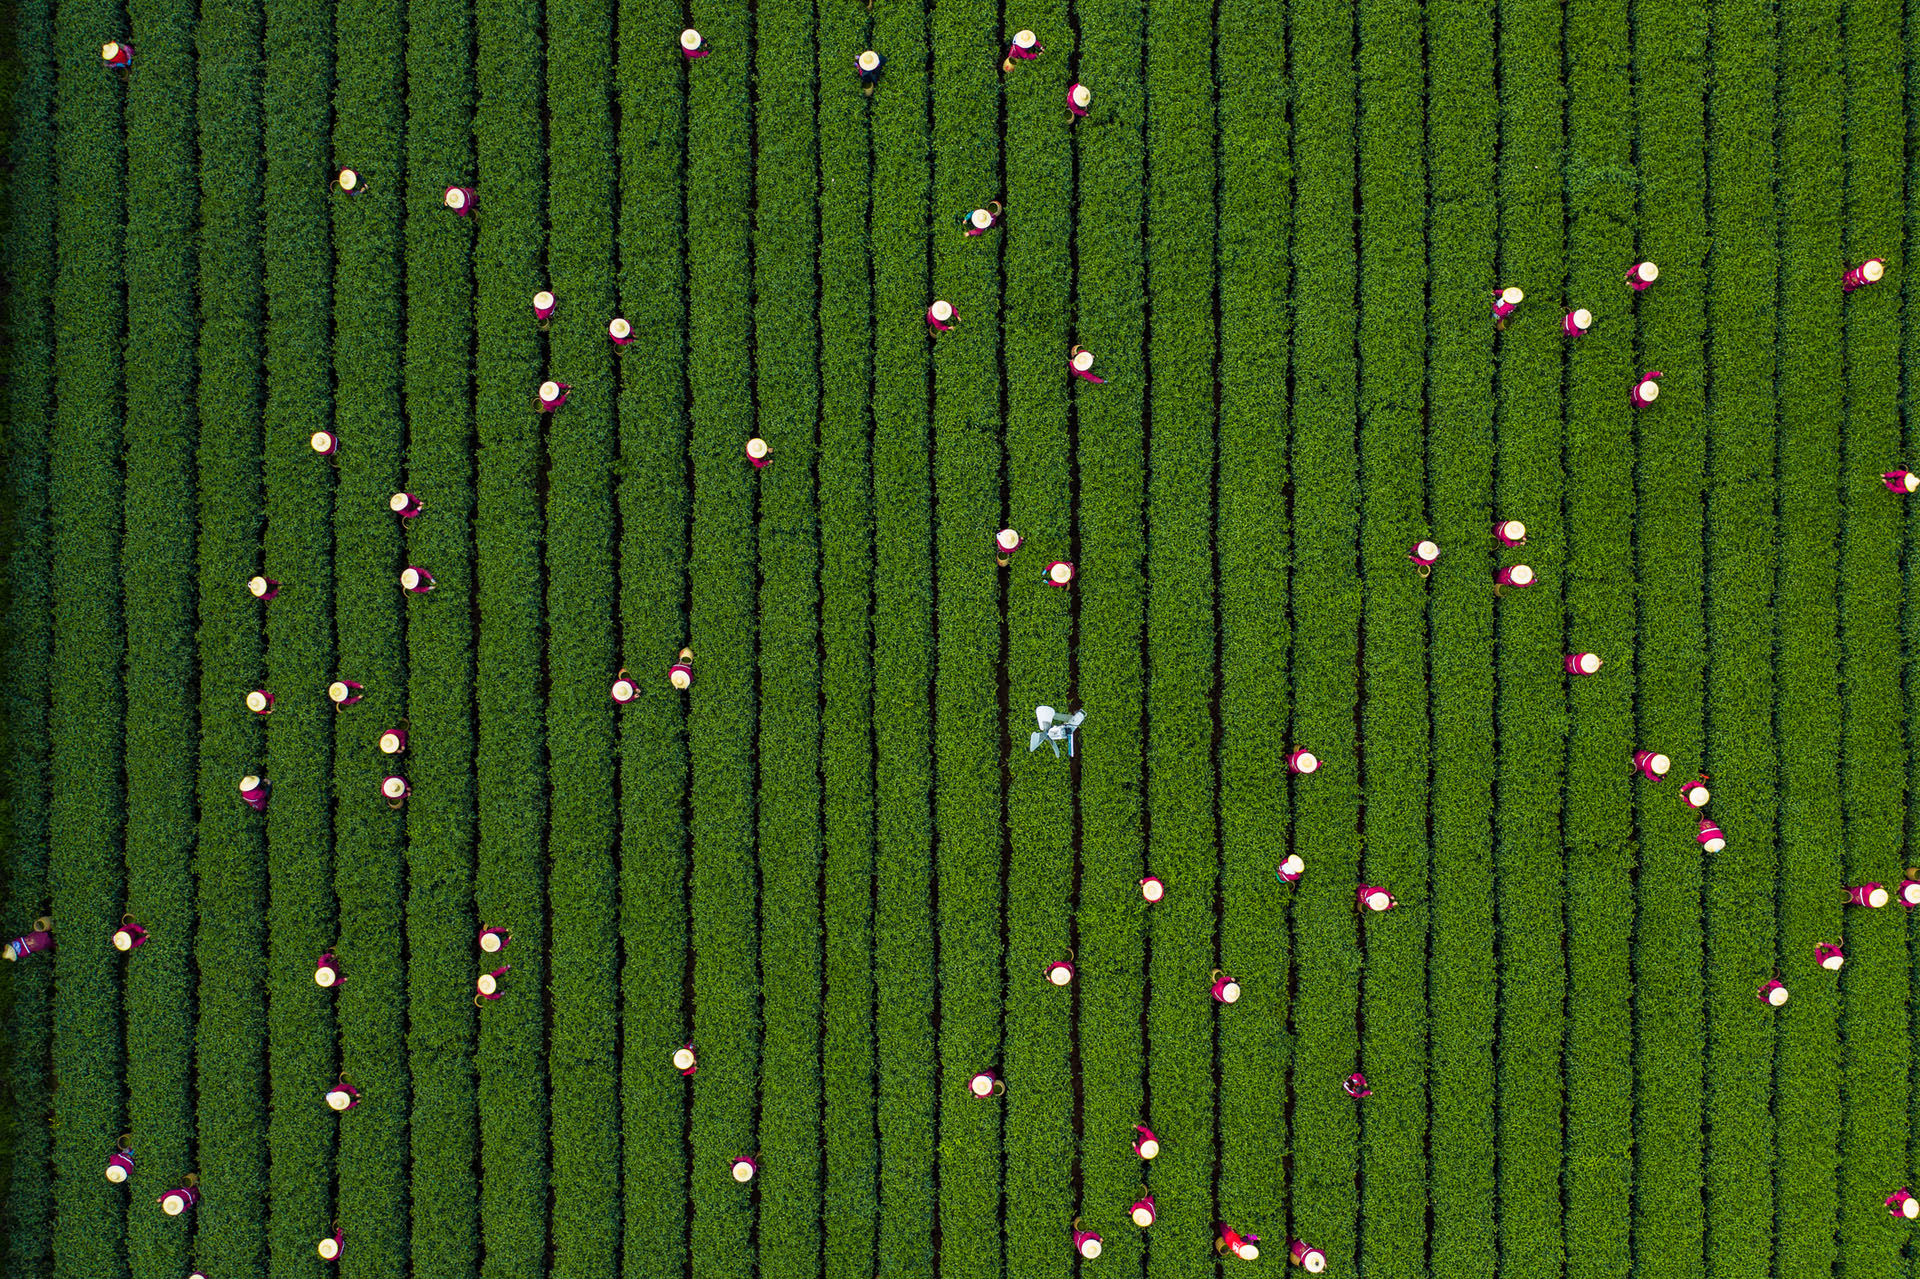 Aerial view of people in a green field